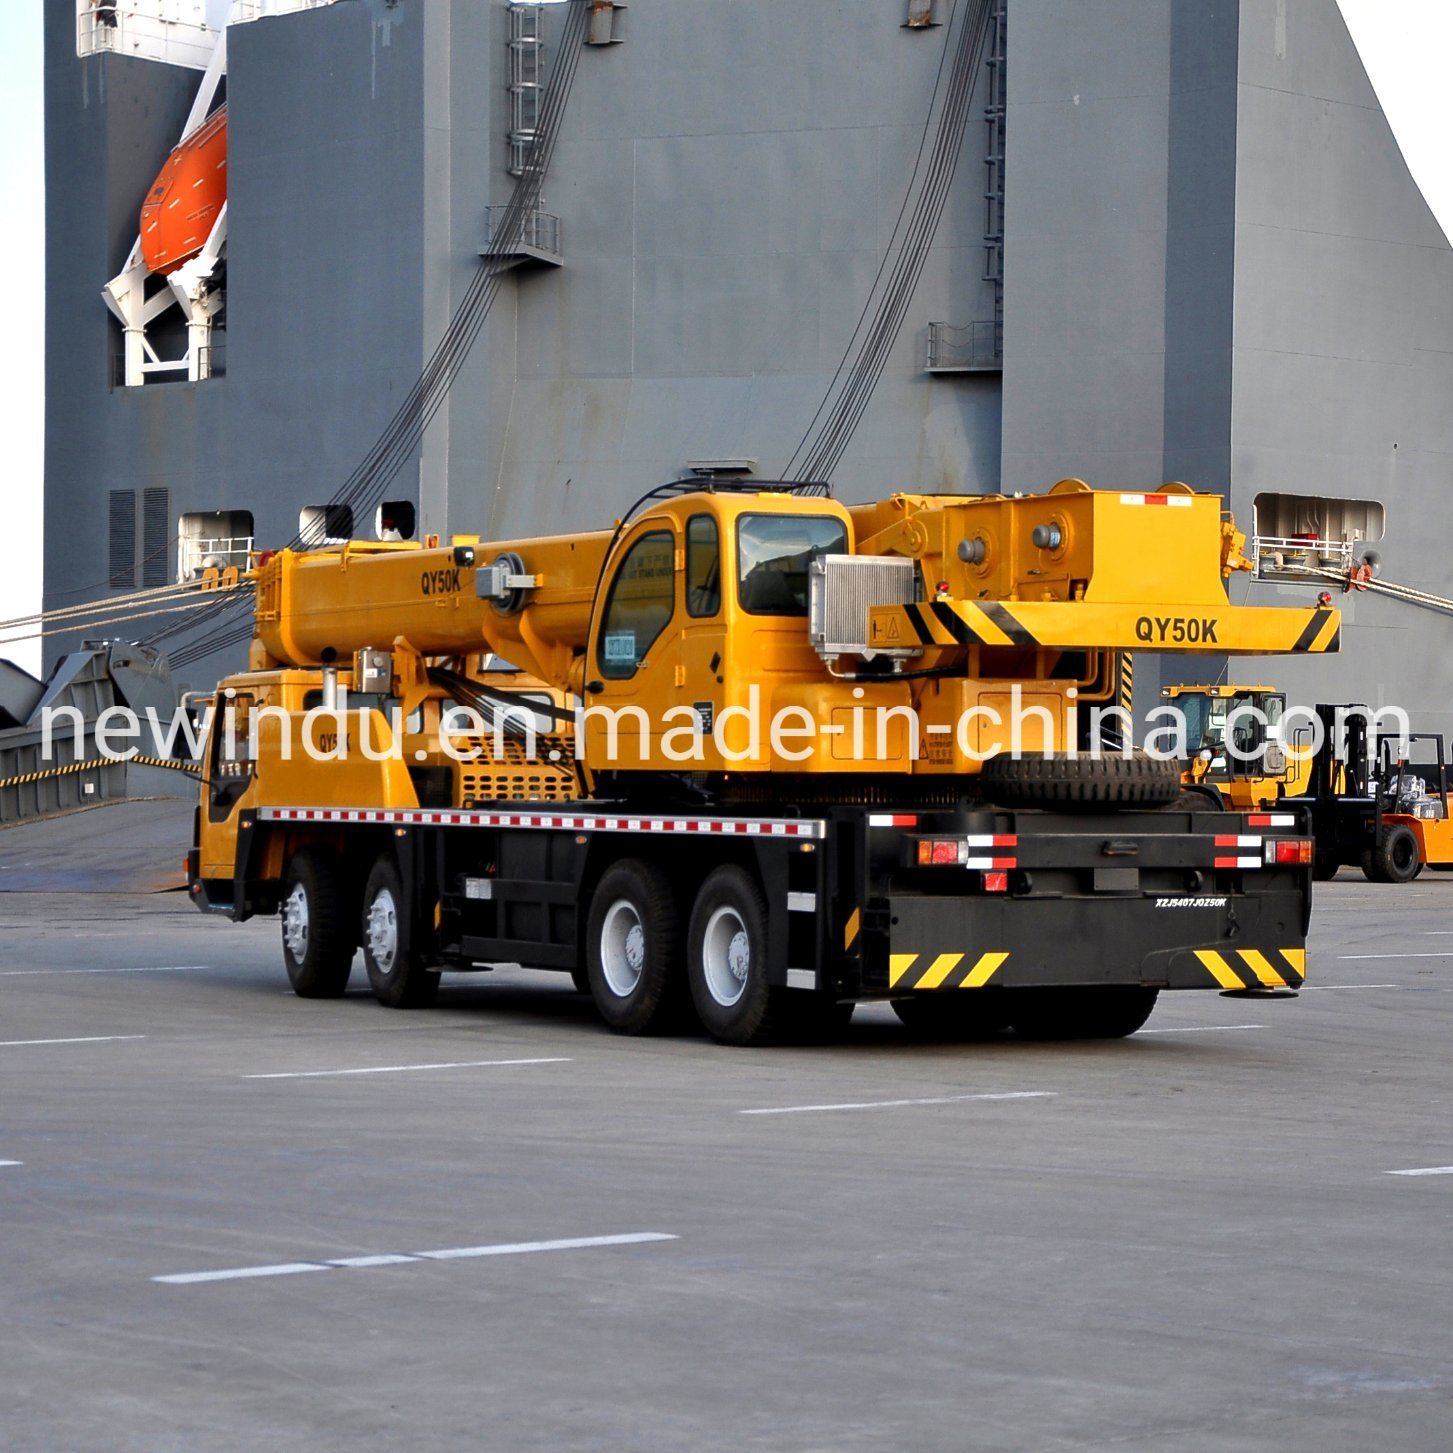 China Made Hoisting Machinery Qy50K 50 Ton Mobile Truck Crane in Stock